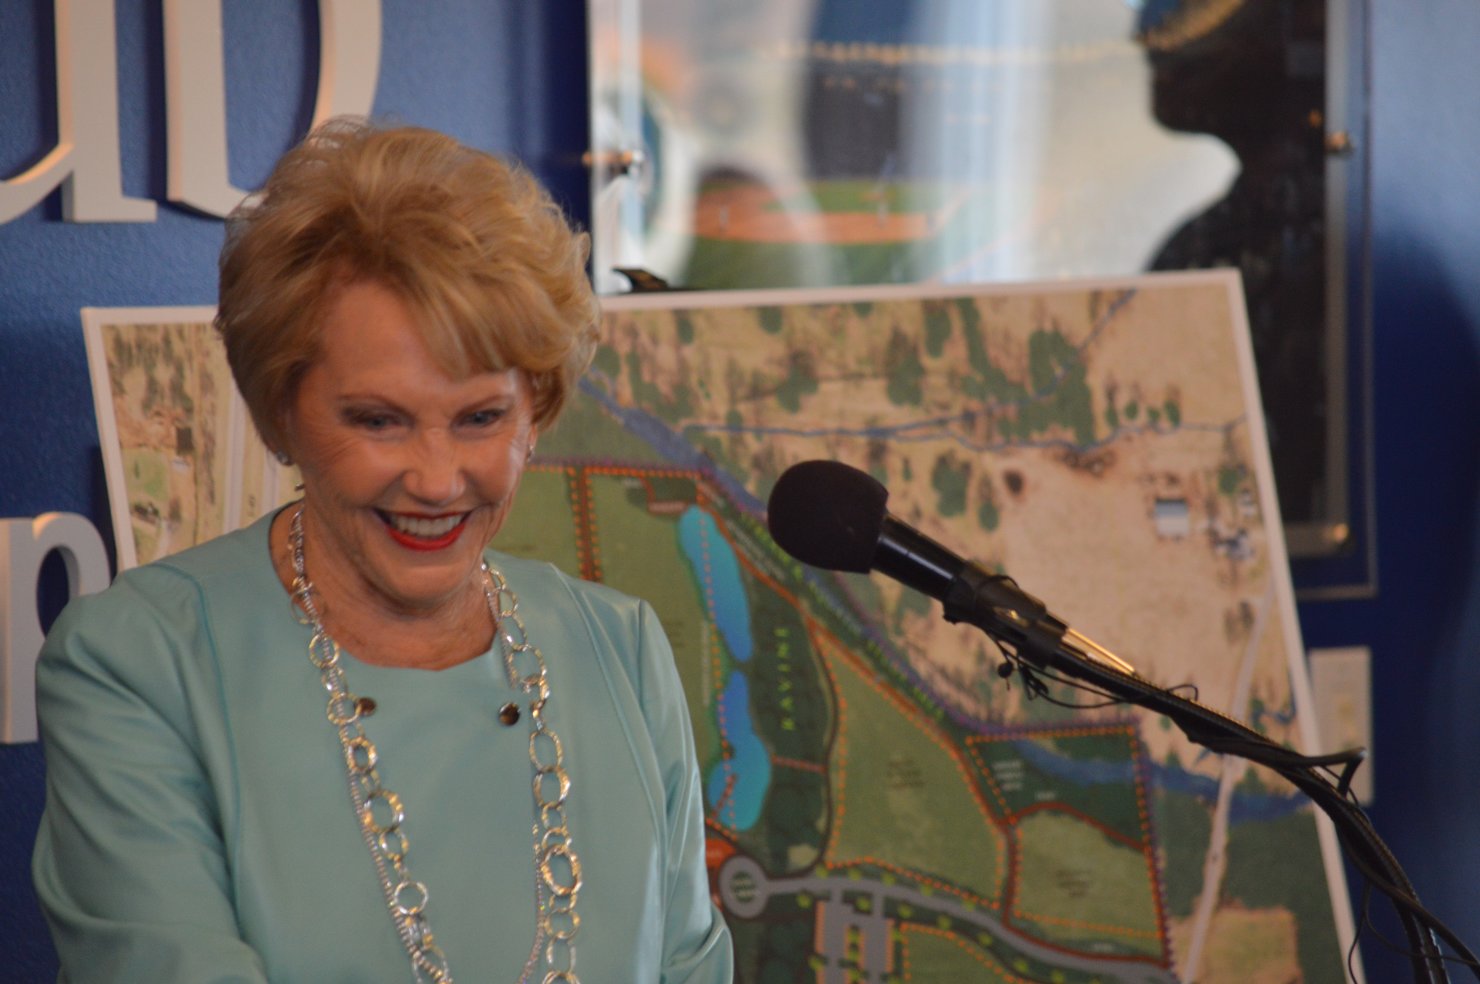 Johnelle Hunt talked earlier today about her family's $5 million contribution to a $15 million capital campaign. The money will be used to build the J.B. Hunt Family Northwest Arkansas Nature Center in Springdale.